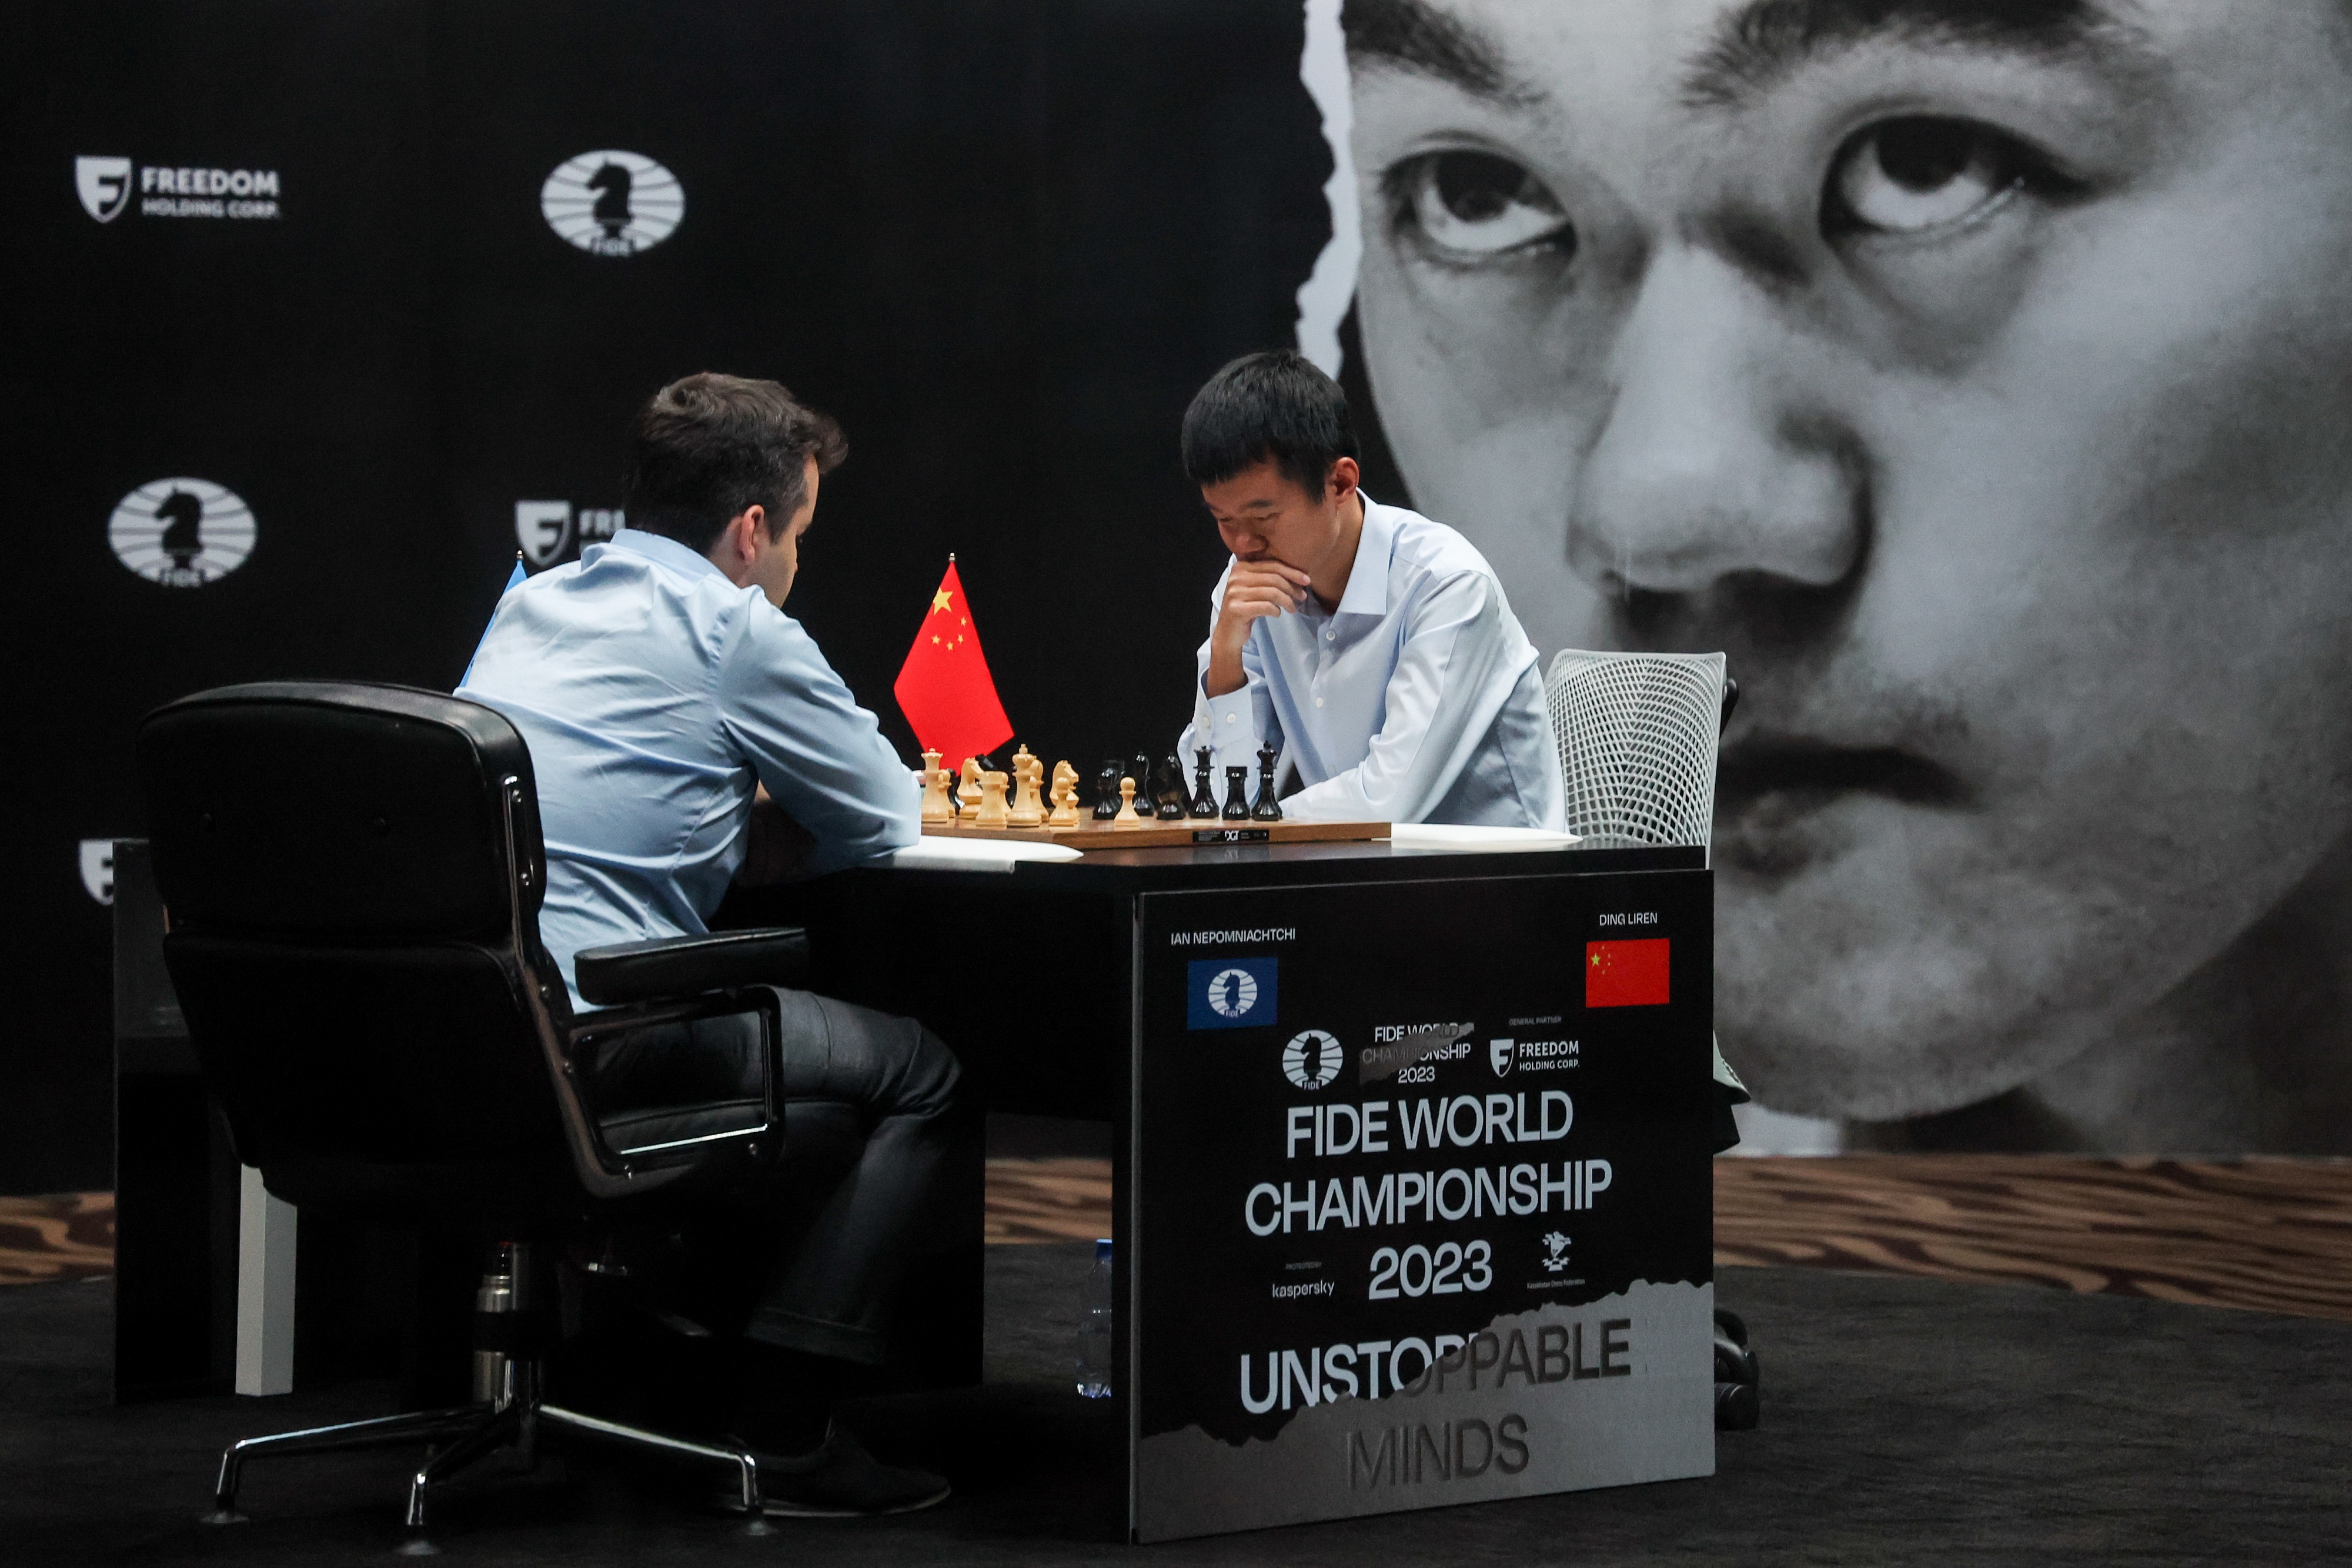 Ding under huge time pressure in the FIDE World Championship! #chess #